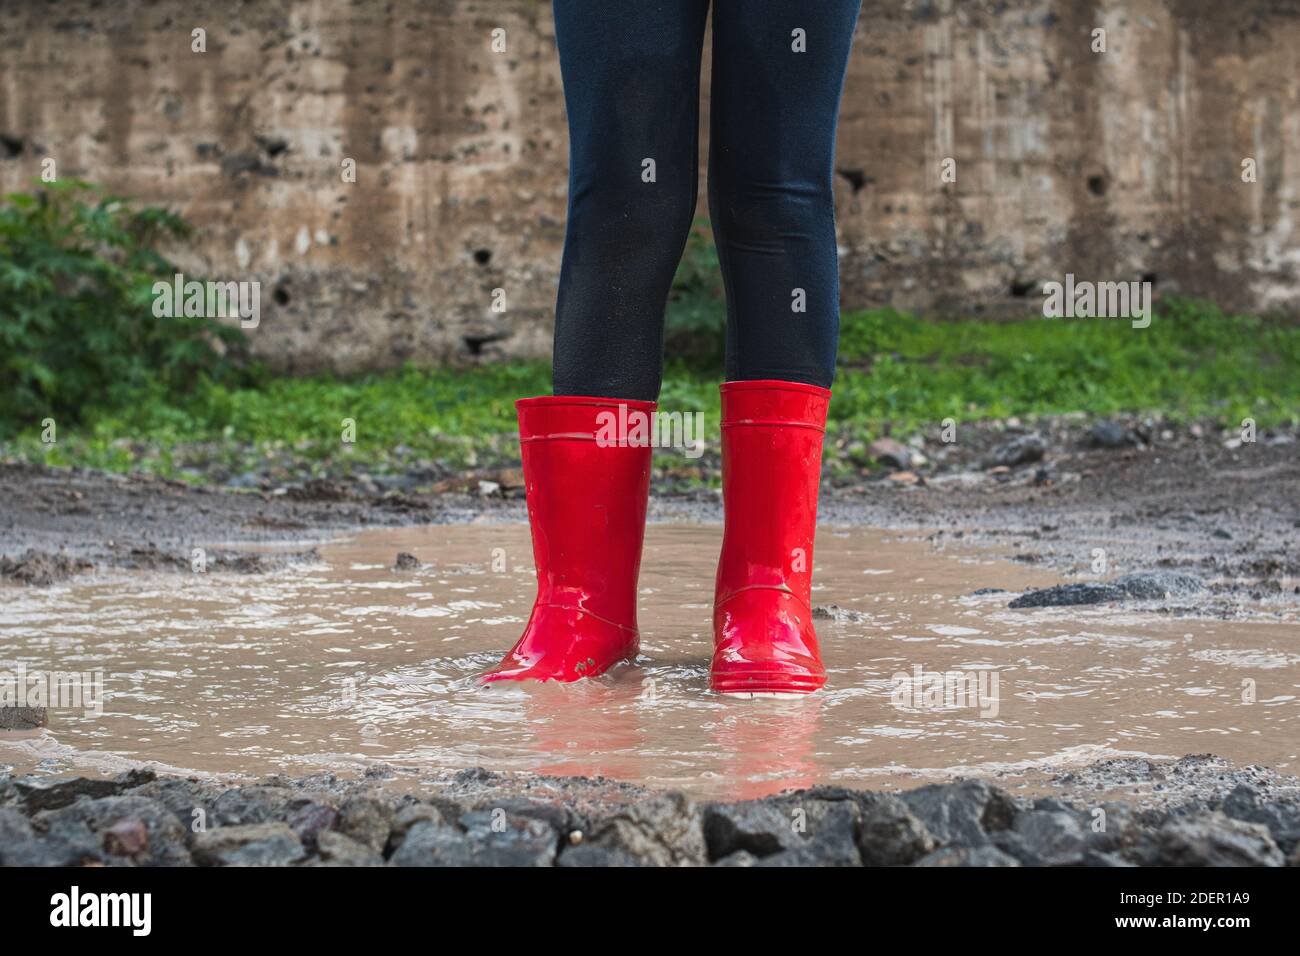 Legs of a girl jumping in a mud puddle, wearing red wellies, splashing ...